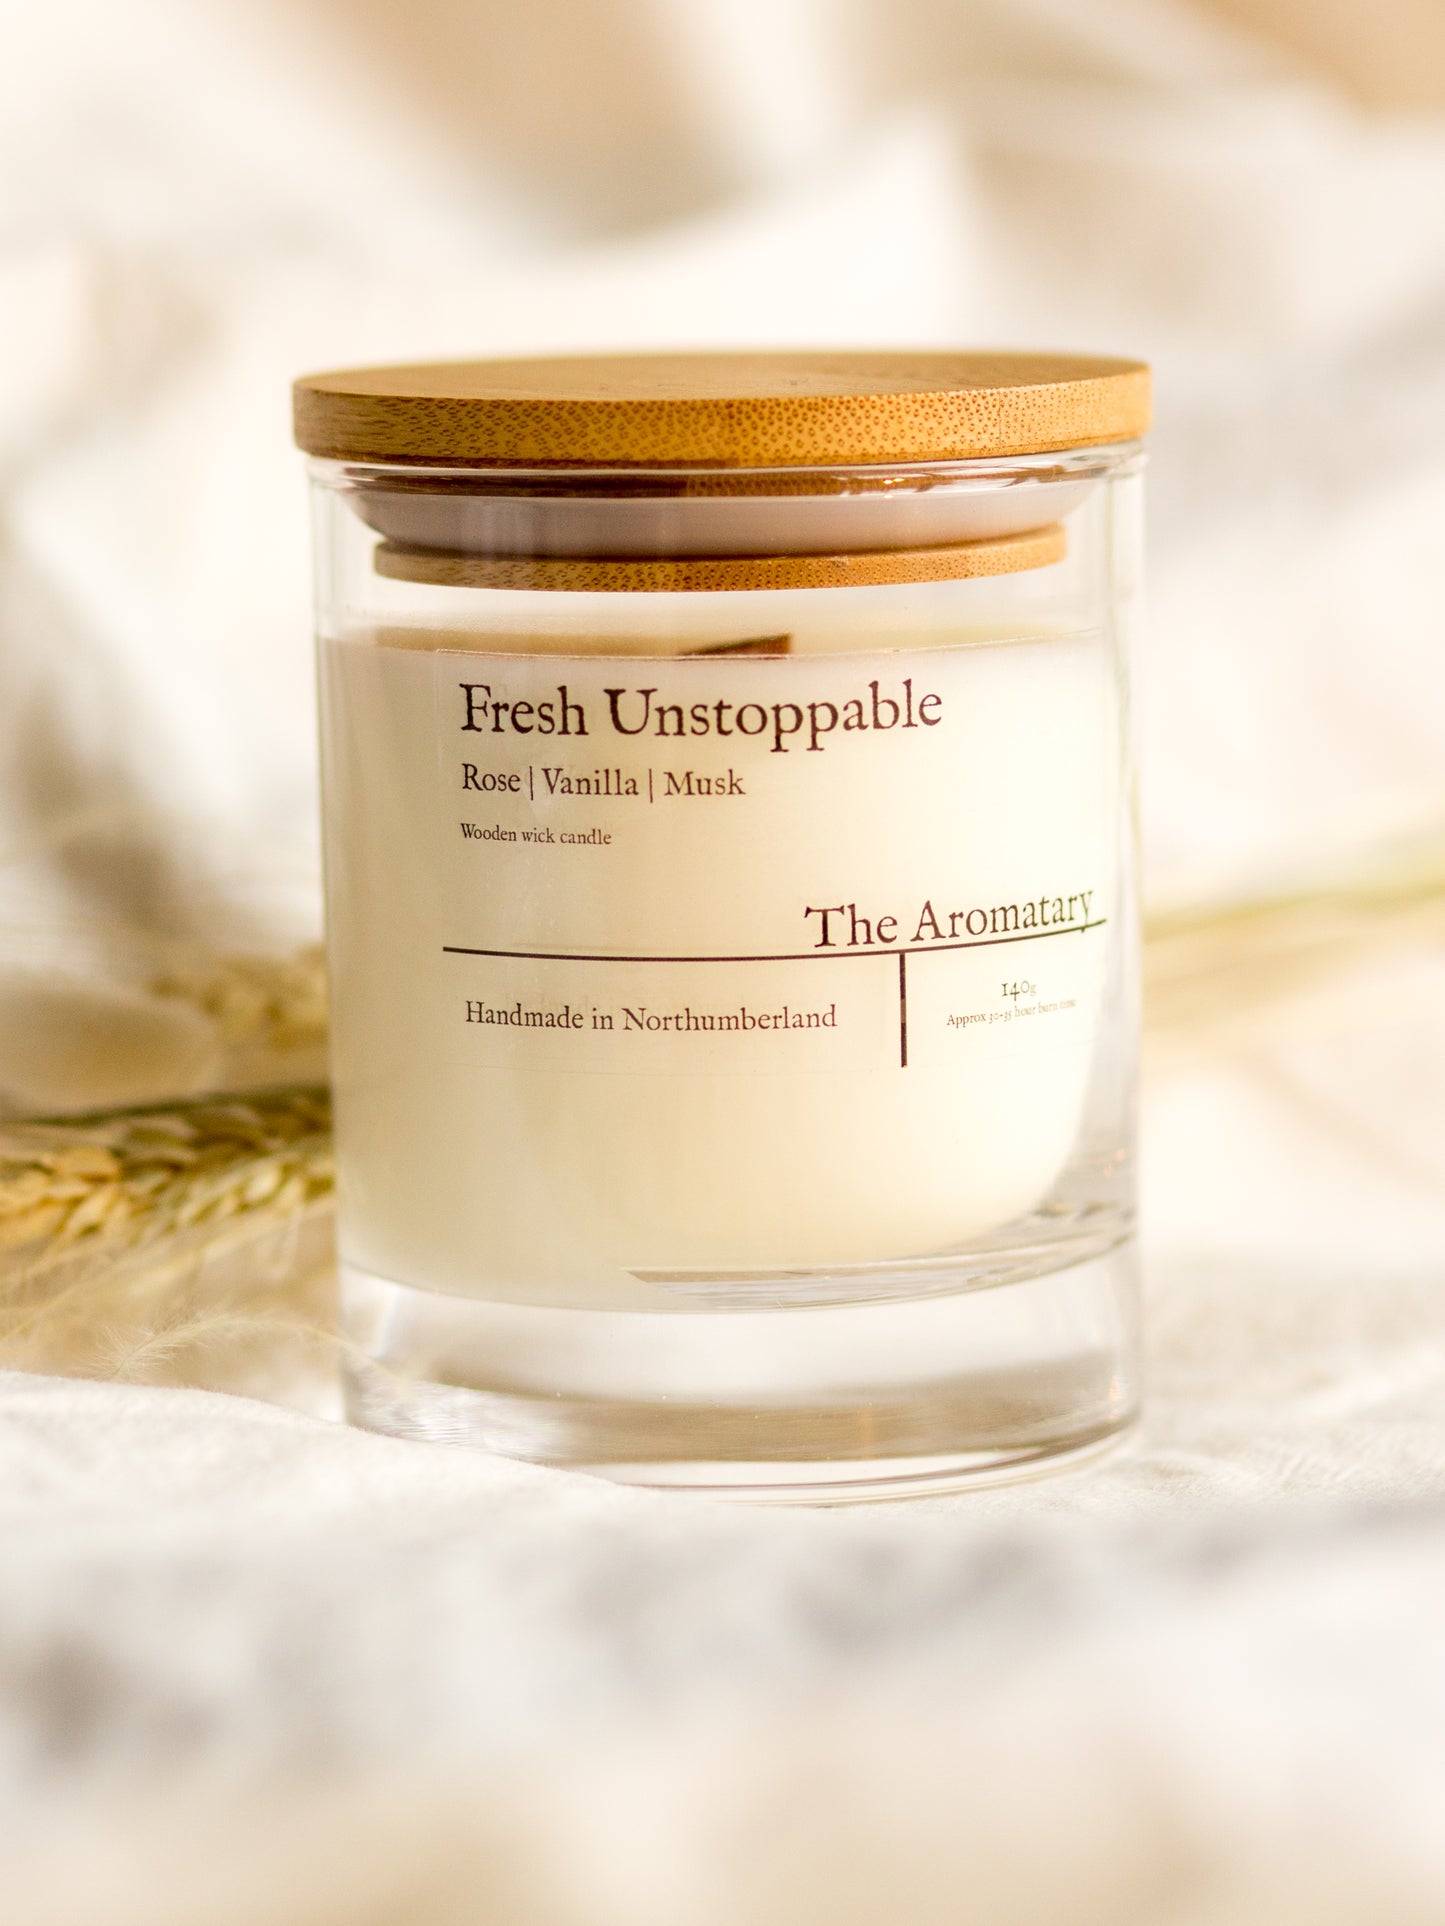 Fresh Unstoppable classic wooden wick candle